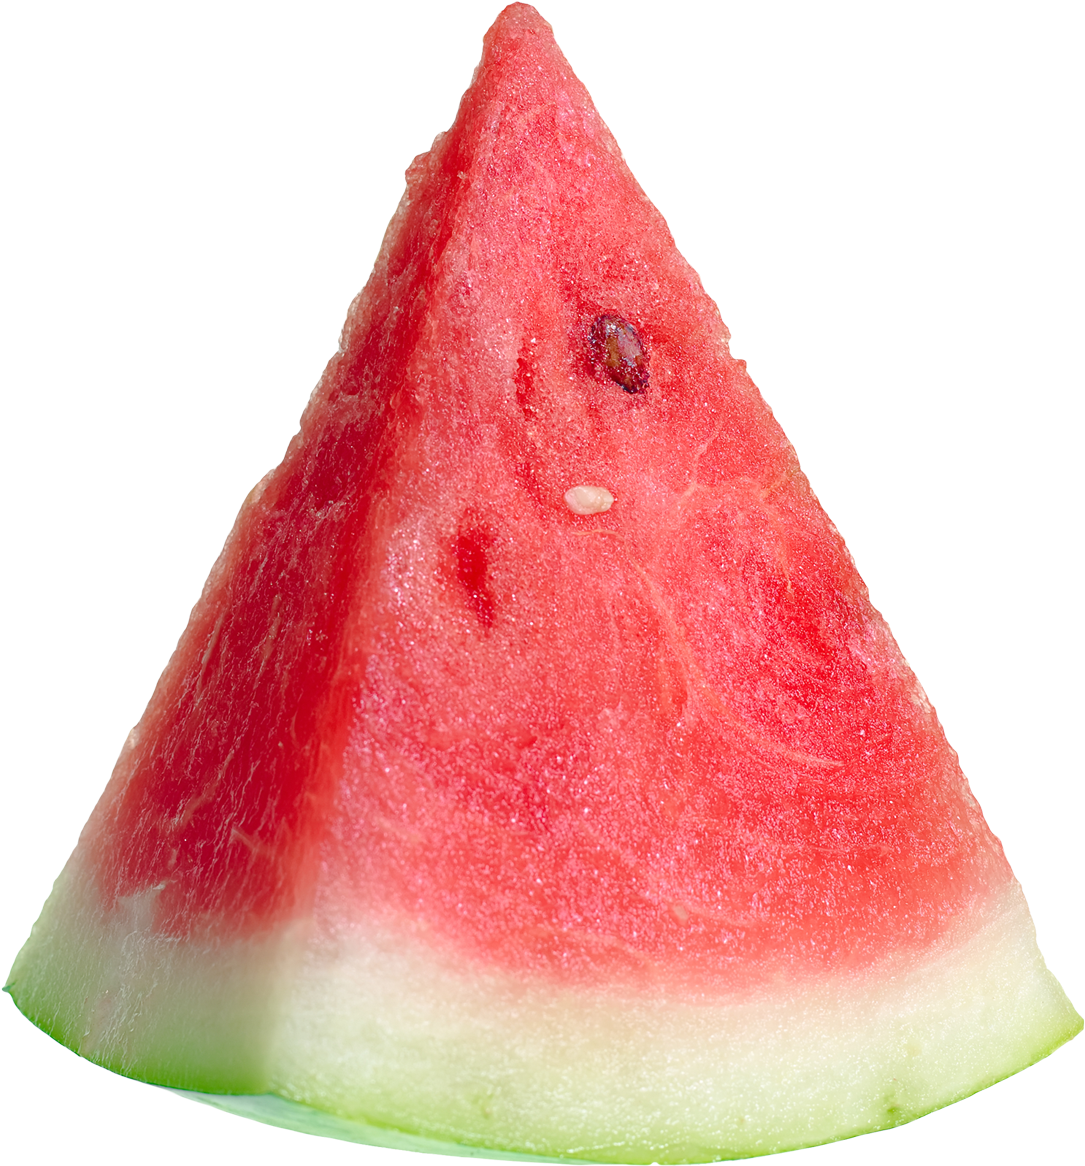 Watermelon Slice Png Image - Watermelon Slice Png Clipart (1186x1259), Png Download